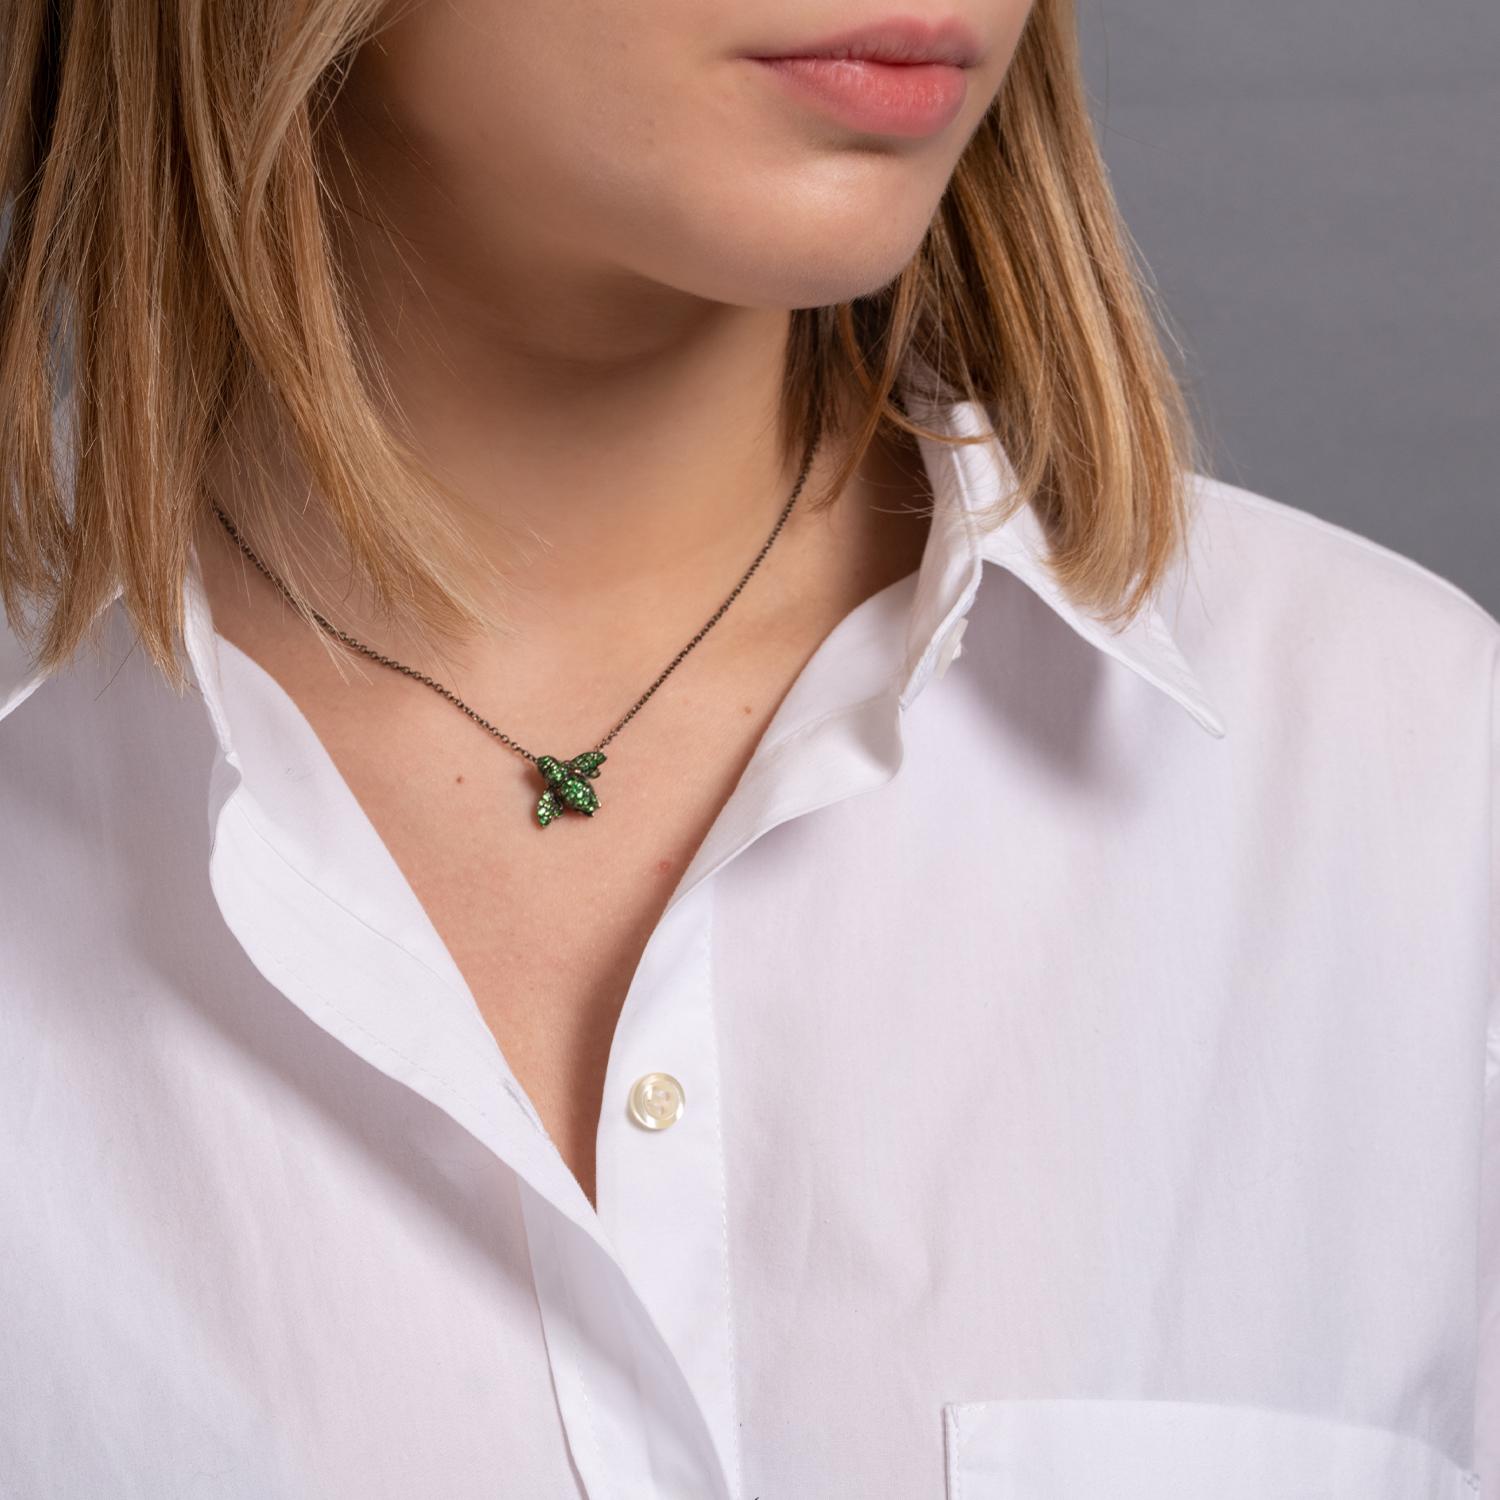 Delicate burnished gold necklace characterized by 0,55 carat of green garnets bee pendant that give a touch of freshness to the jewel. The stones give depth like a flight.
length 40 cm